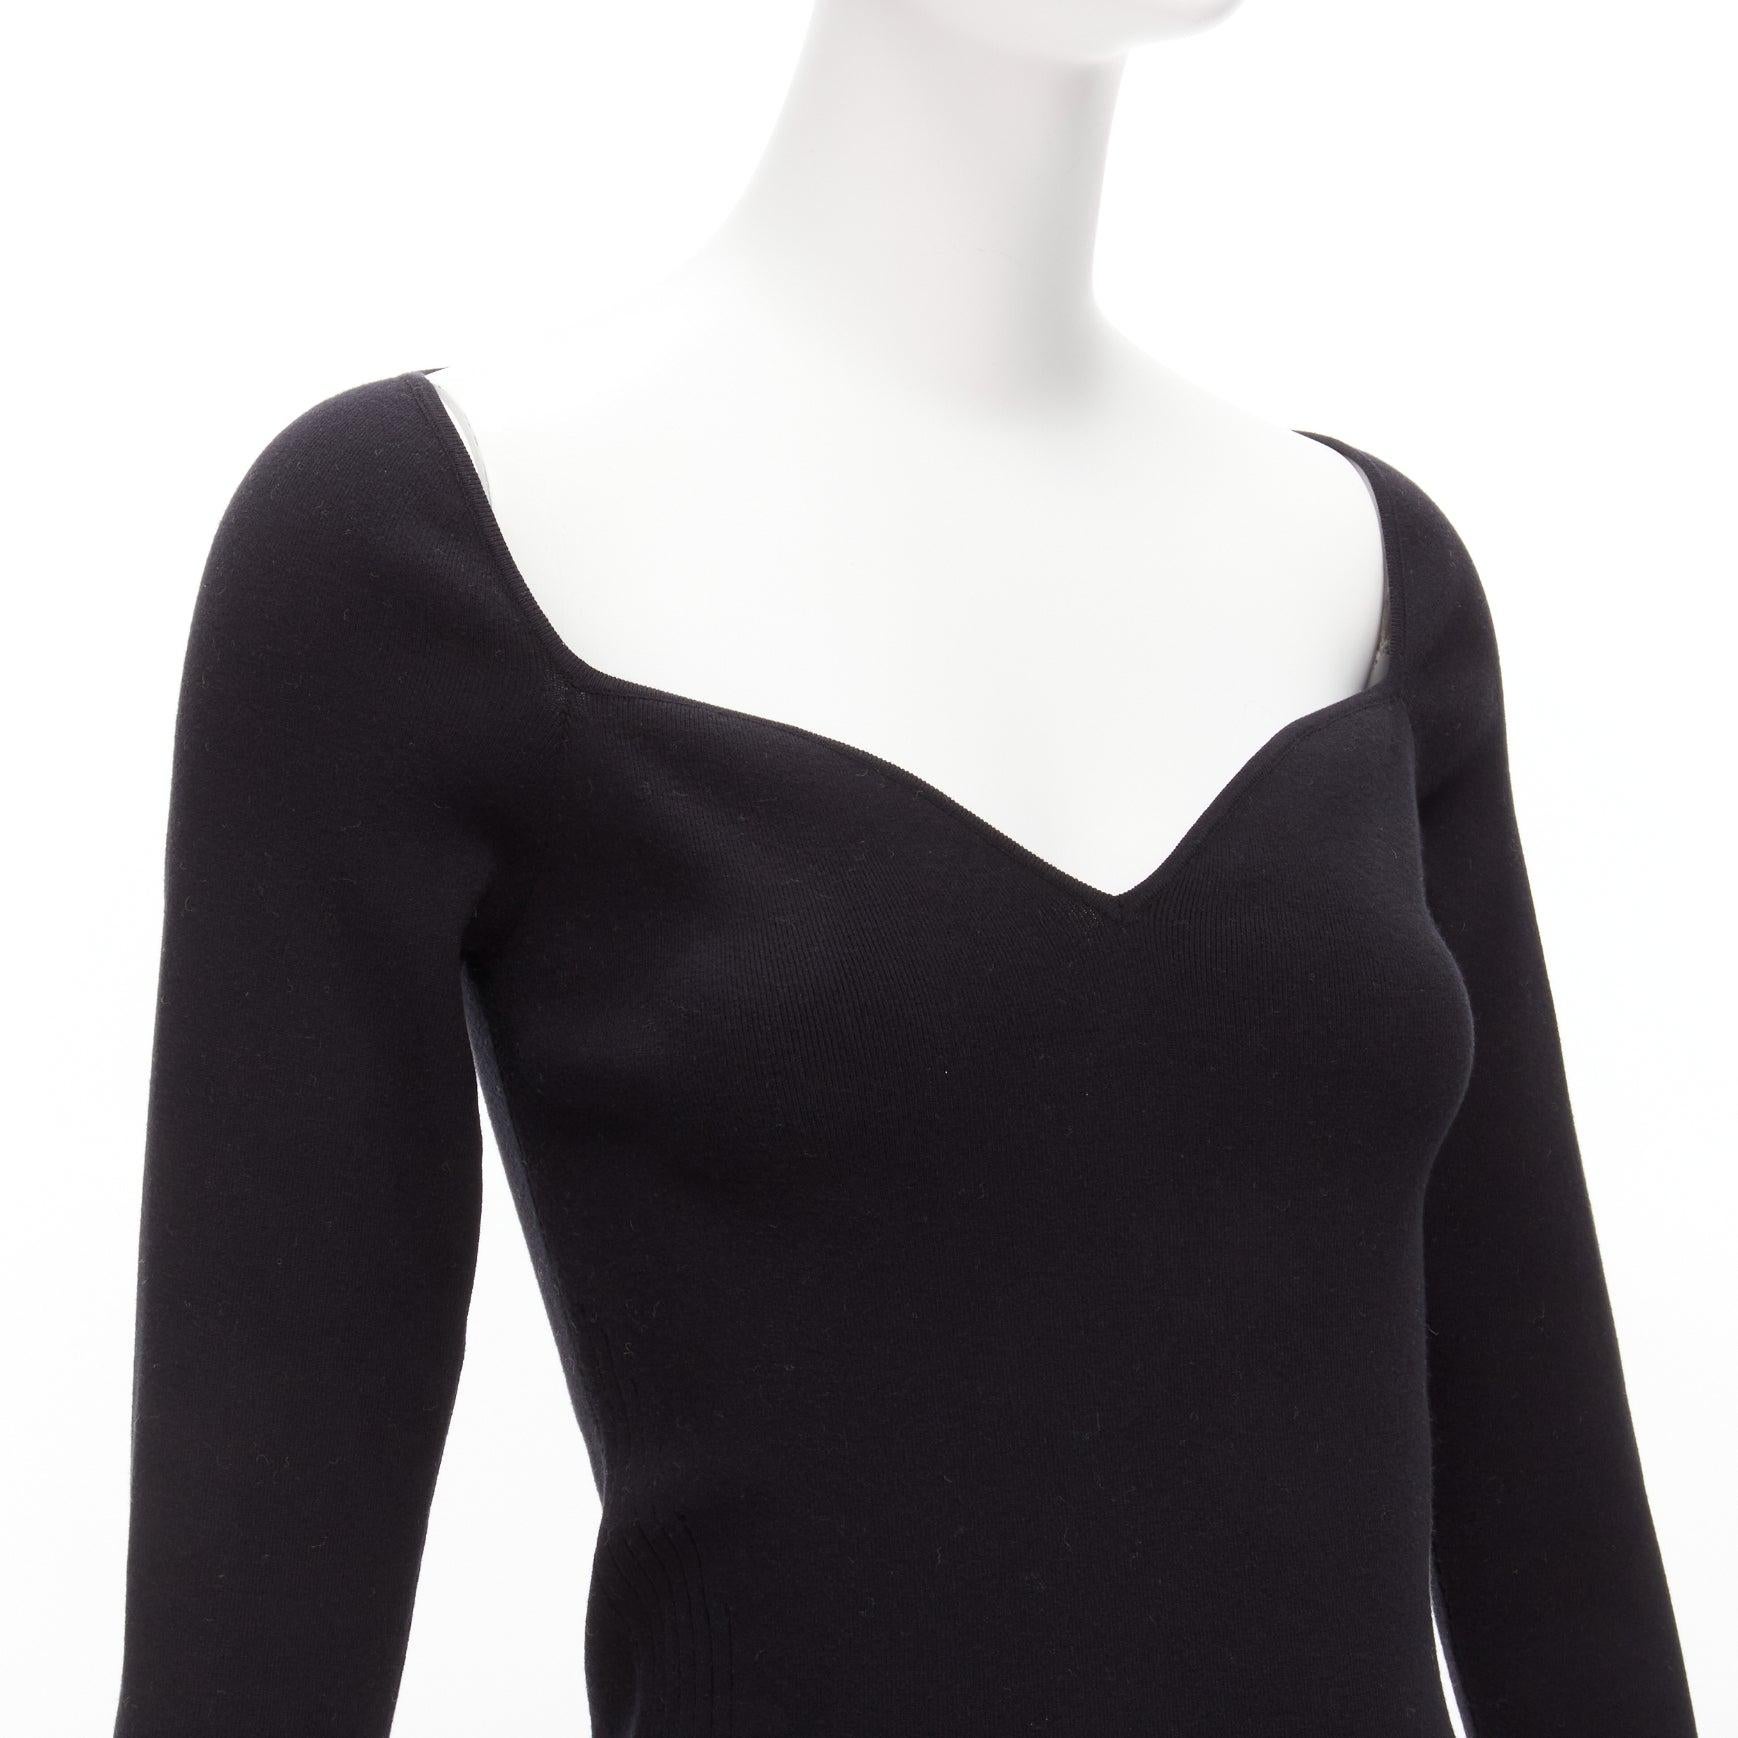 new BALENCIAGA Demna black modal knit sweetheart neckline knitted top FR40 L
Reference: TGAS/D00583
Brand: Balenciaga
Designer: Demna
Collection: 2020
Material: Modal, Blend
Color: Black
Pattern: Solid
Closure: Pullover
Extra Details: Kintted